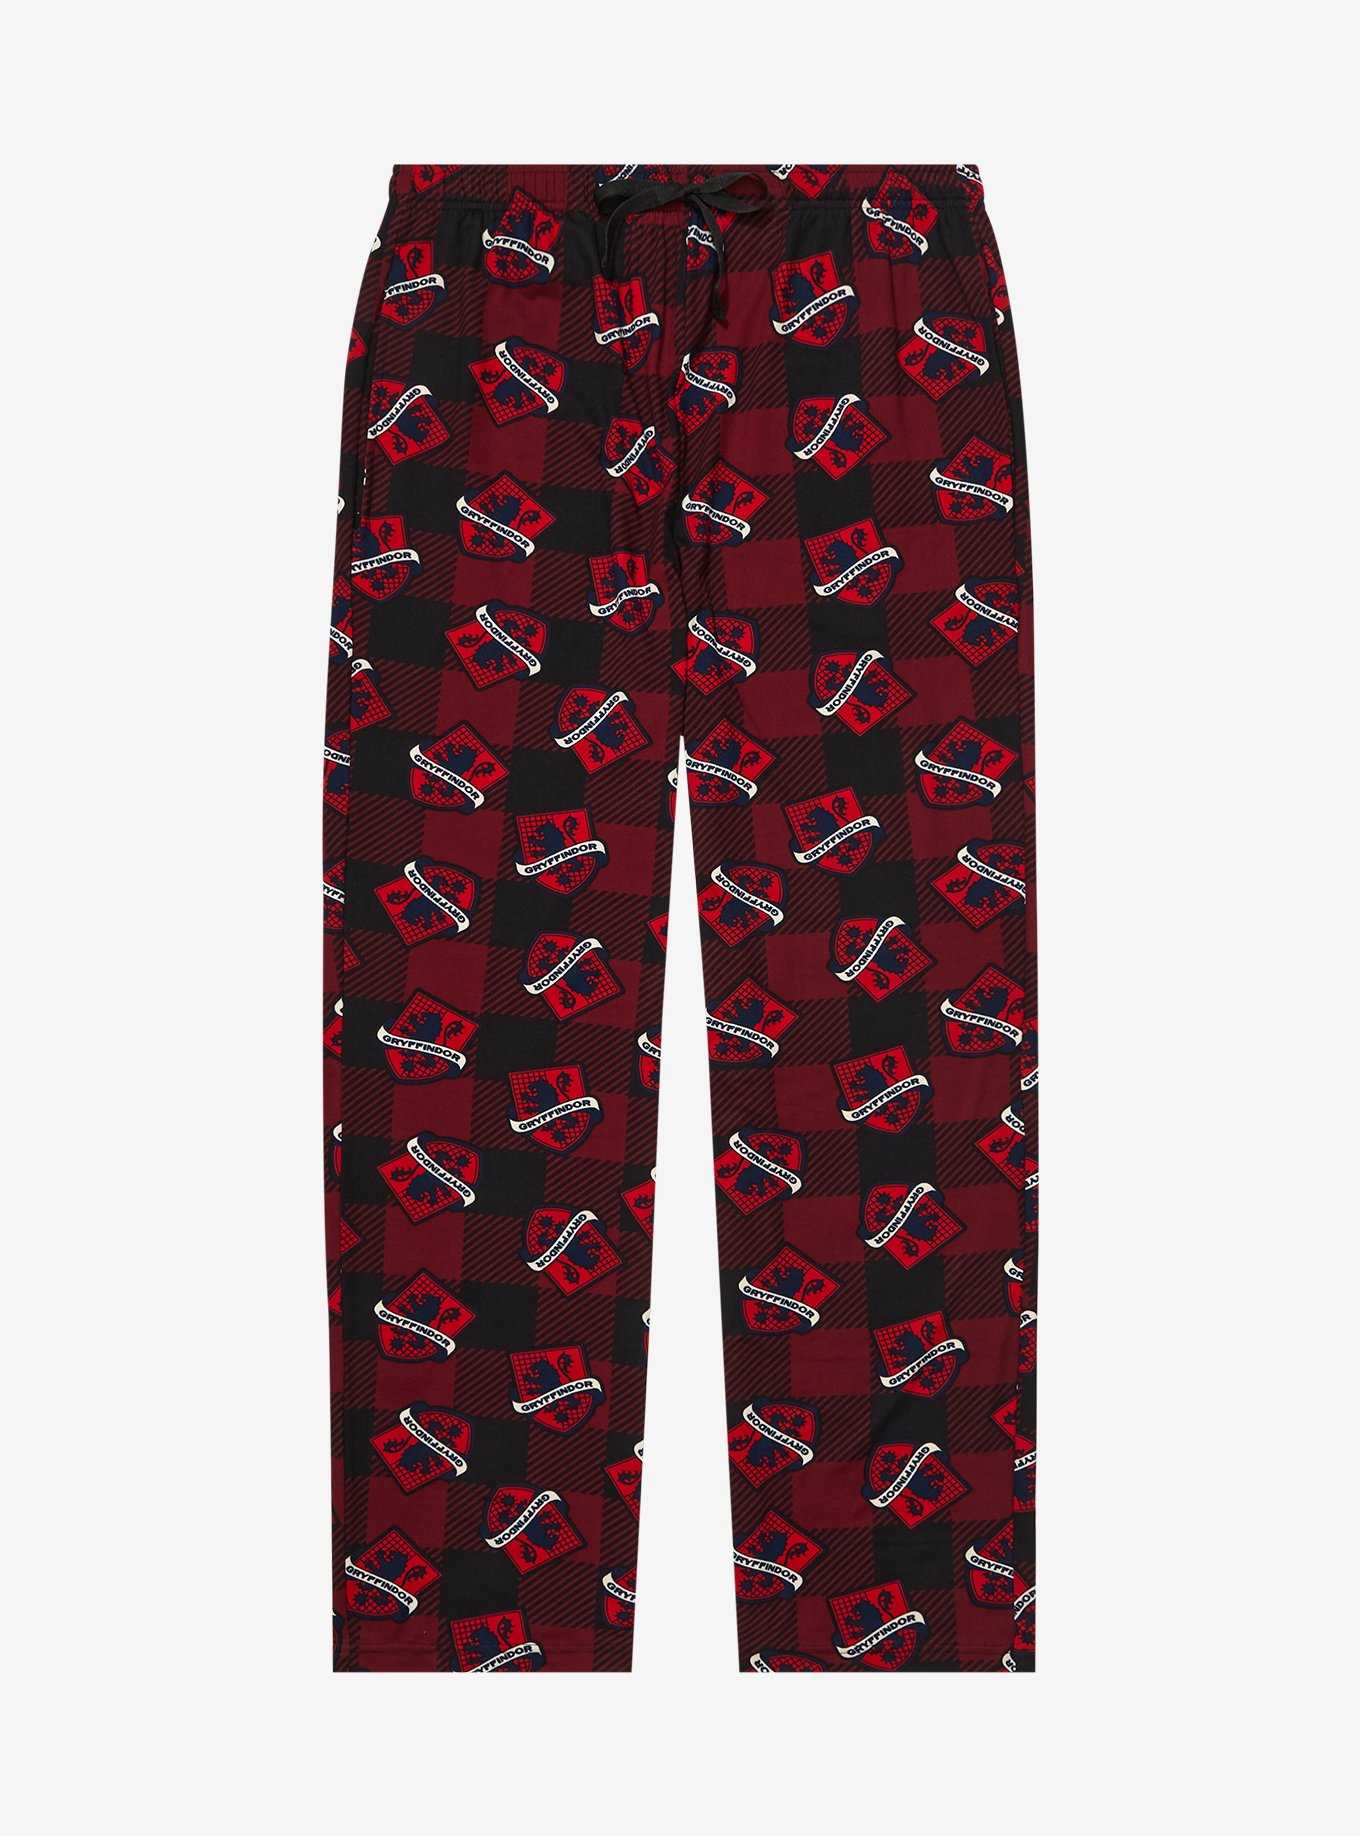 Harry Potter Plaid Gryffindor Allover Print Sleep Pants - BoxLunch Exclusive, , hi-res